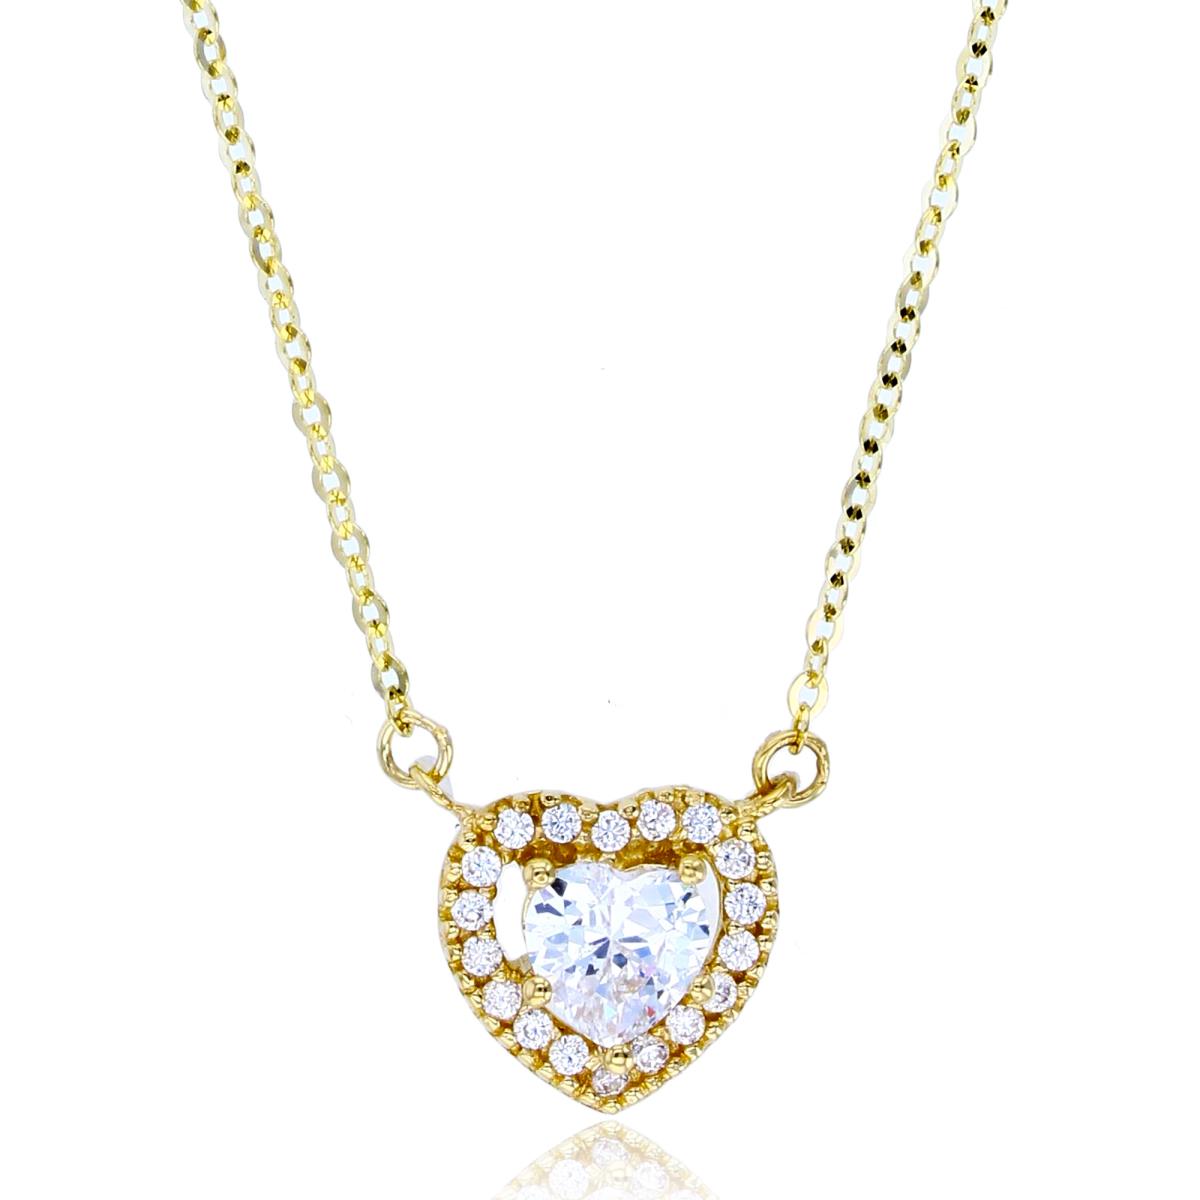 10K Yellow Gold 4.5mm HS & Rnd CZ Halo Heart 17+1"Necklace